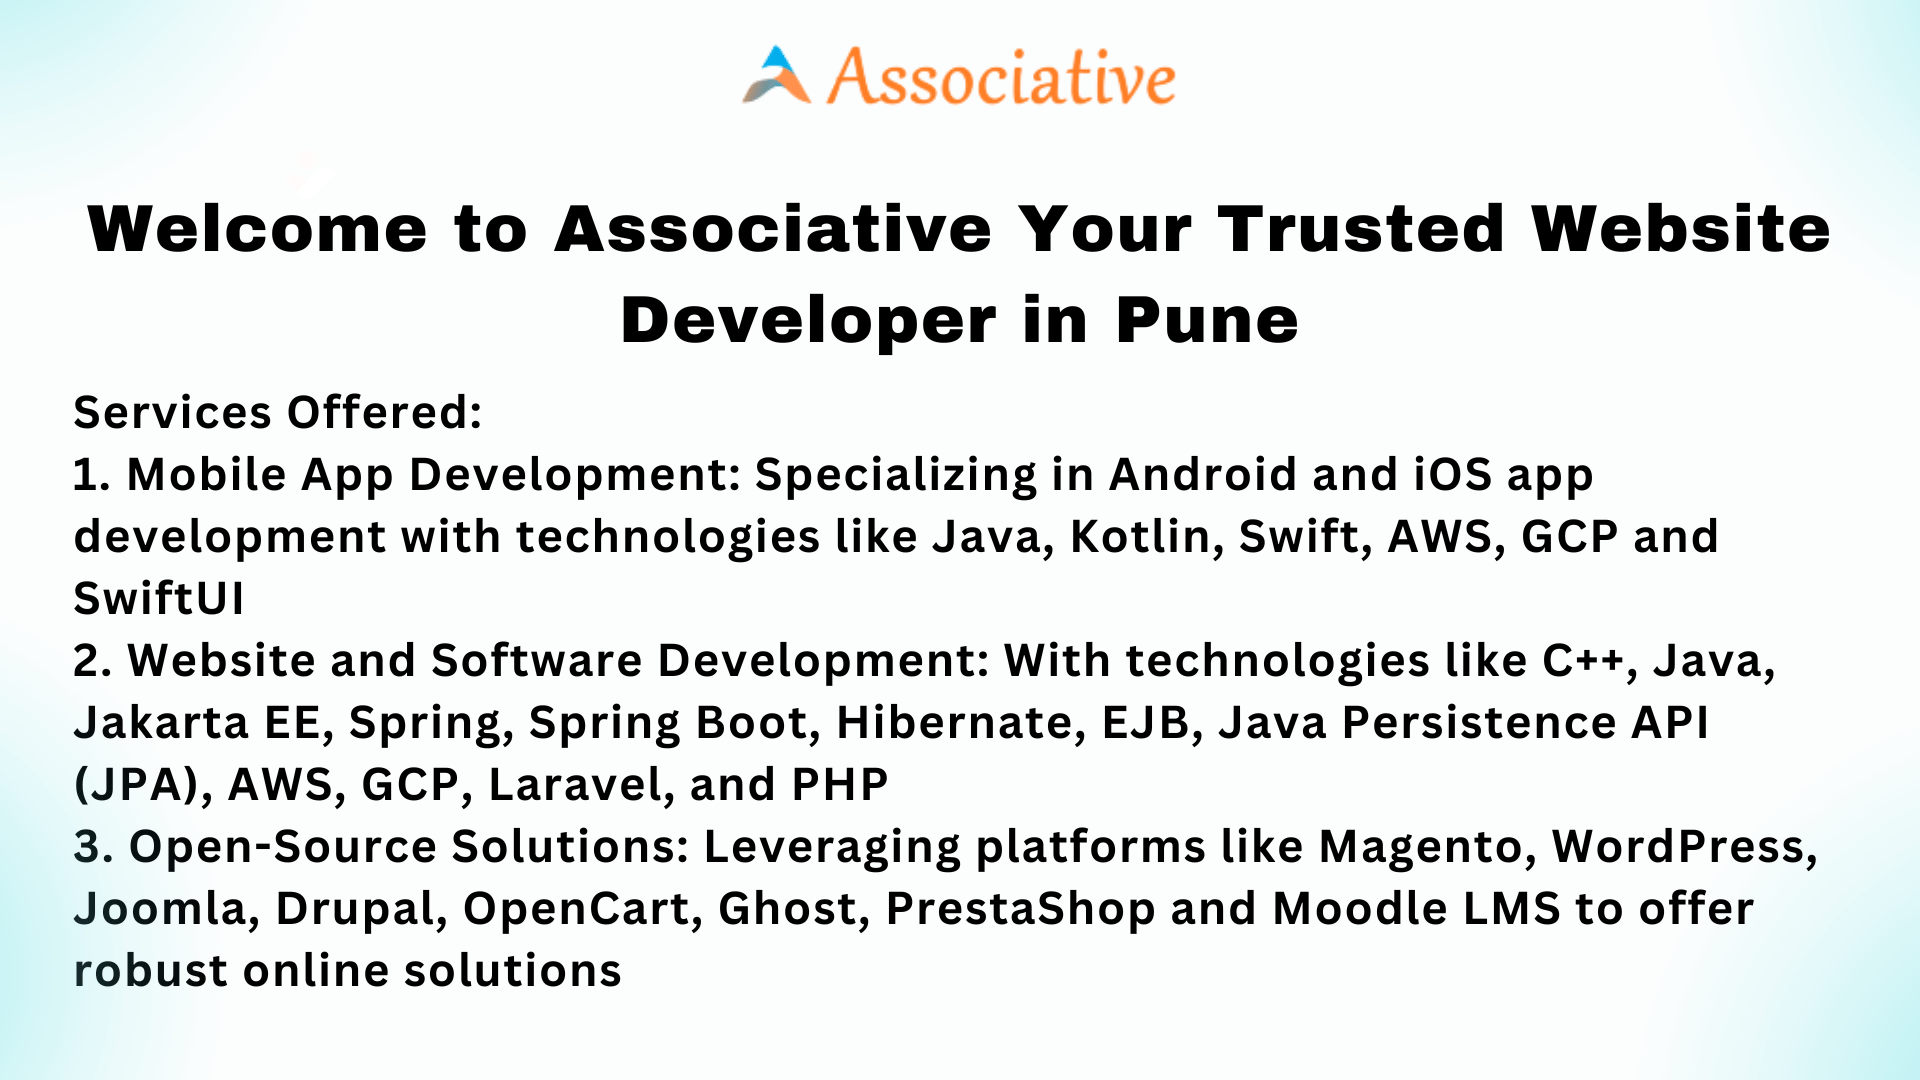 Welcome to Associative Your Trusted Website Developer in Pune